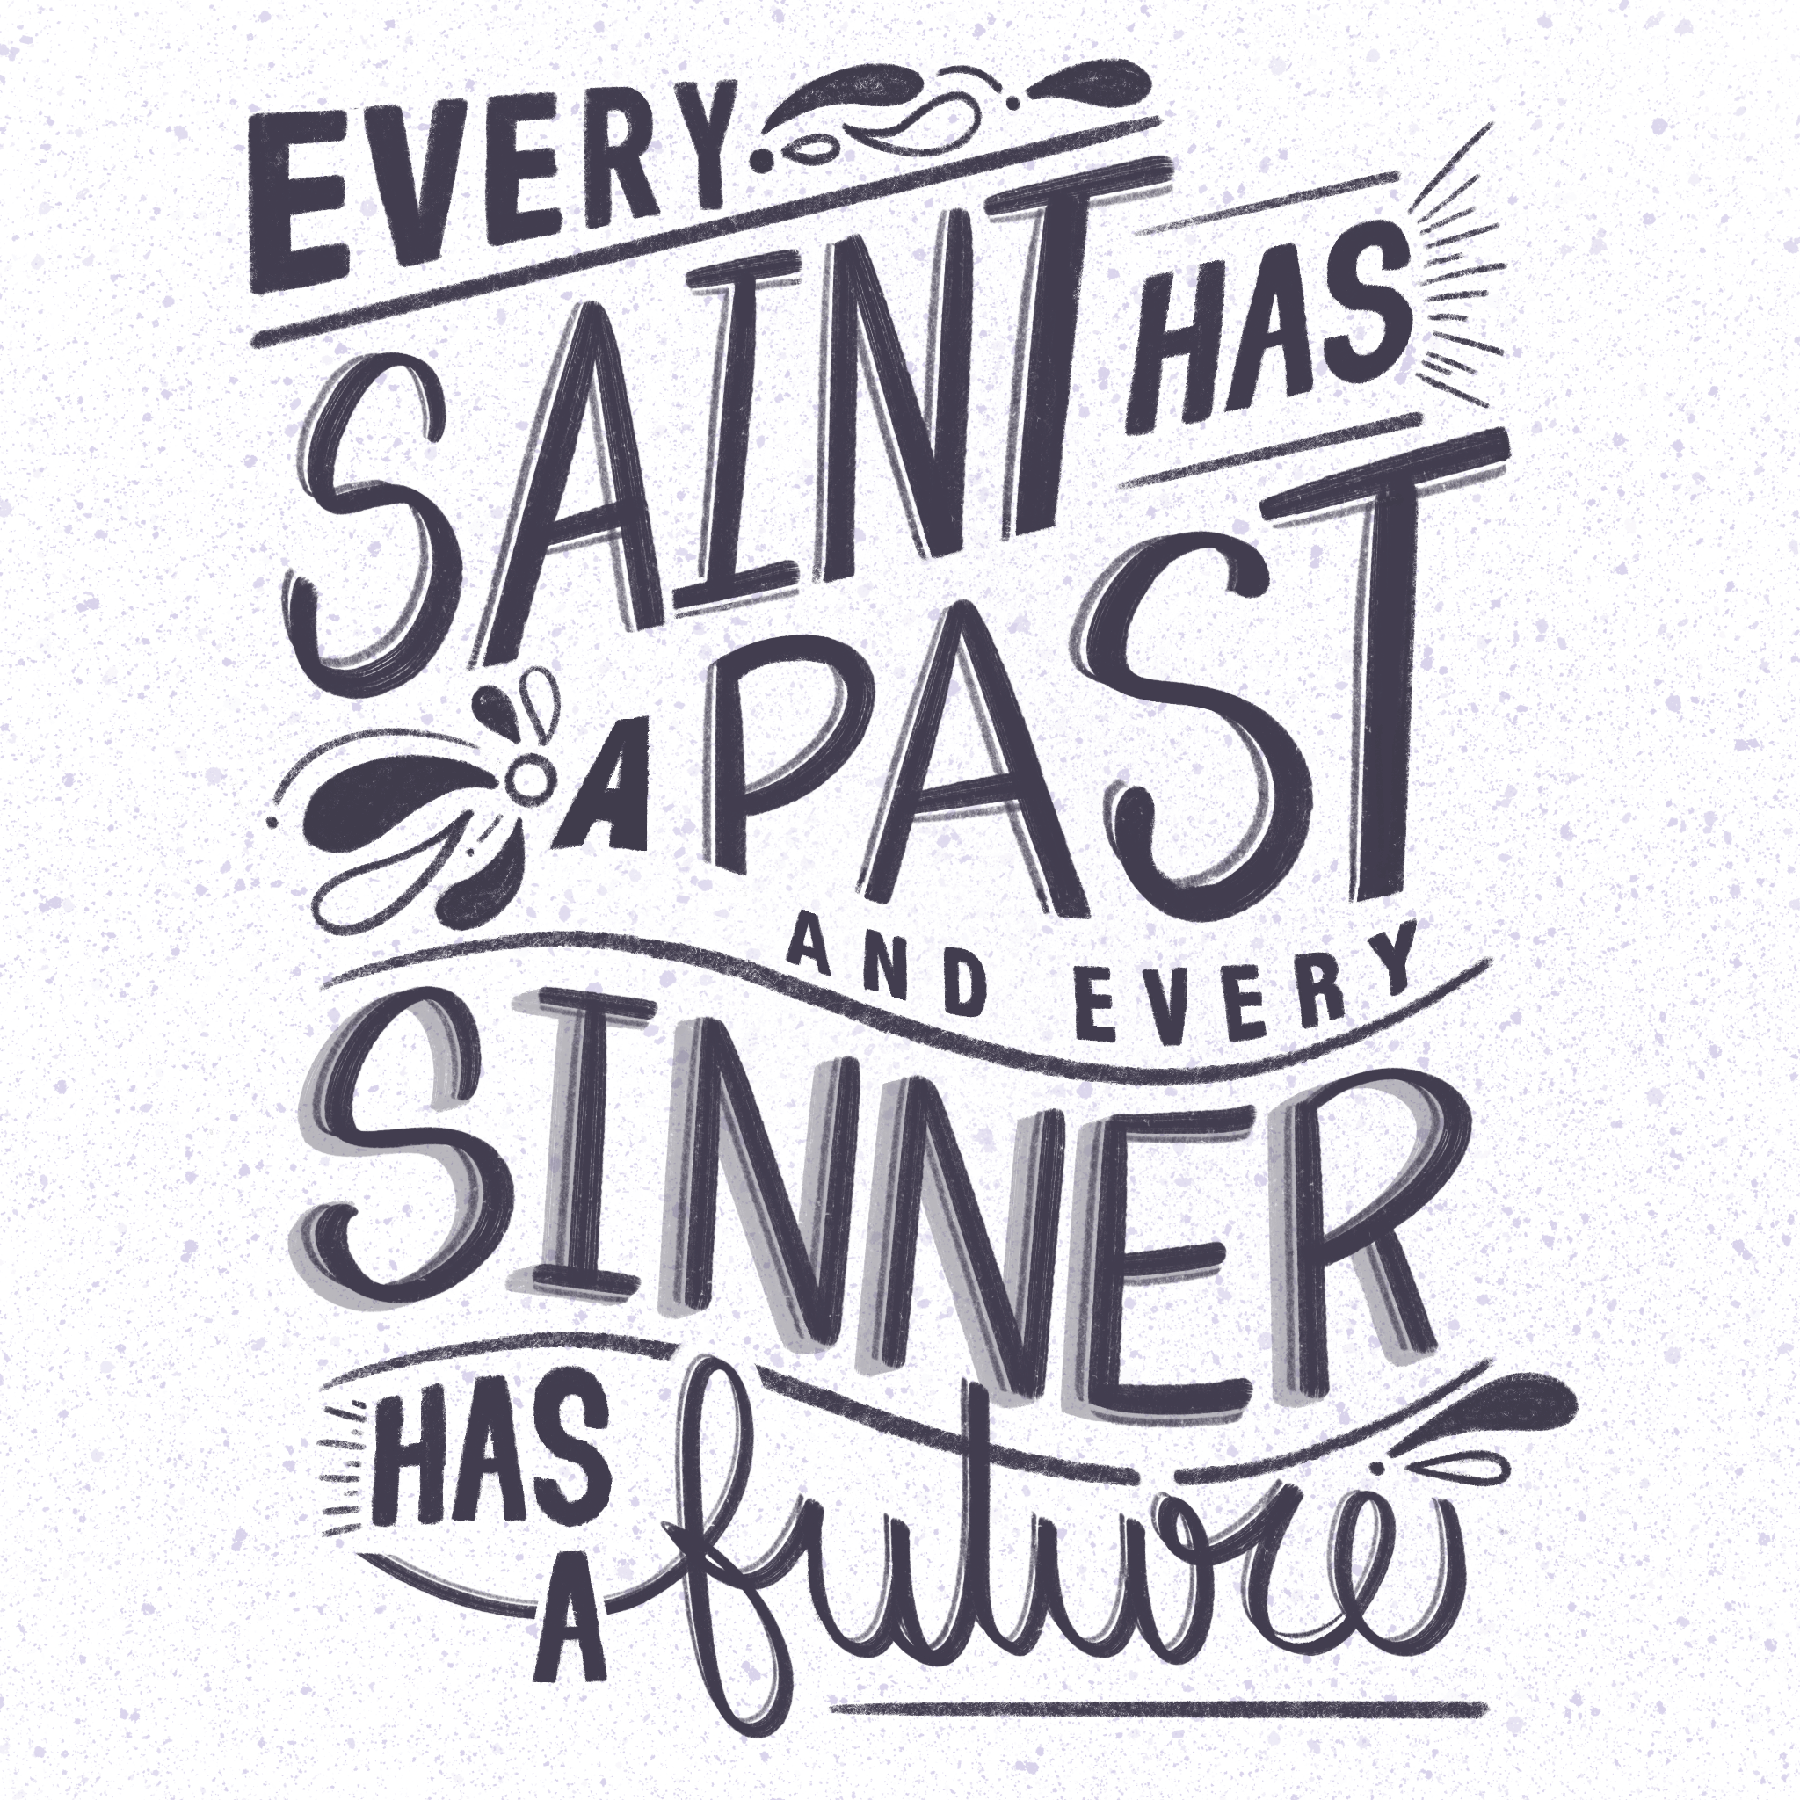 Every saint has a past and every sinner has a future